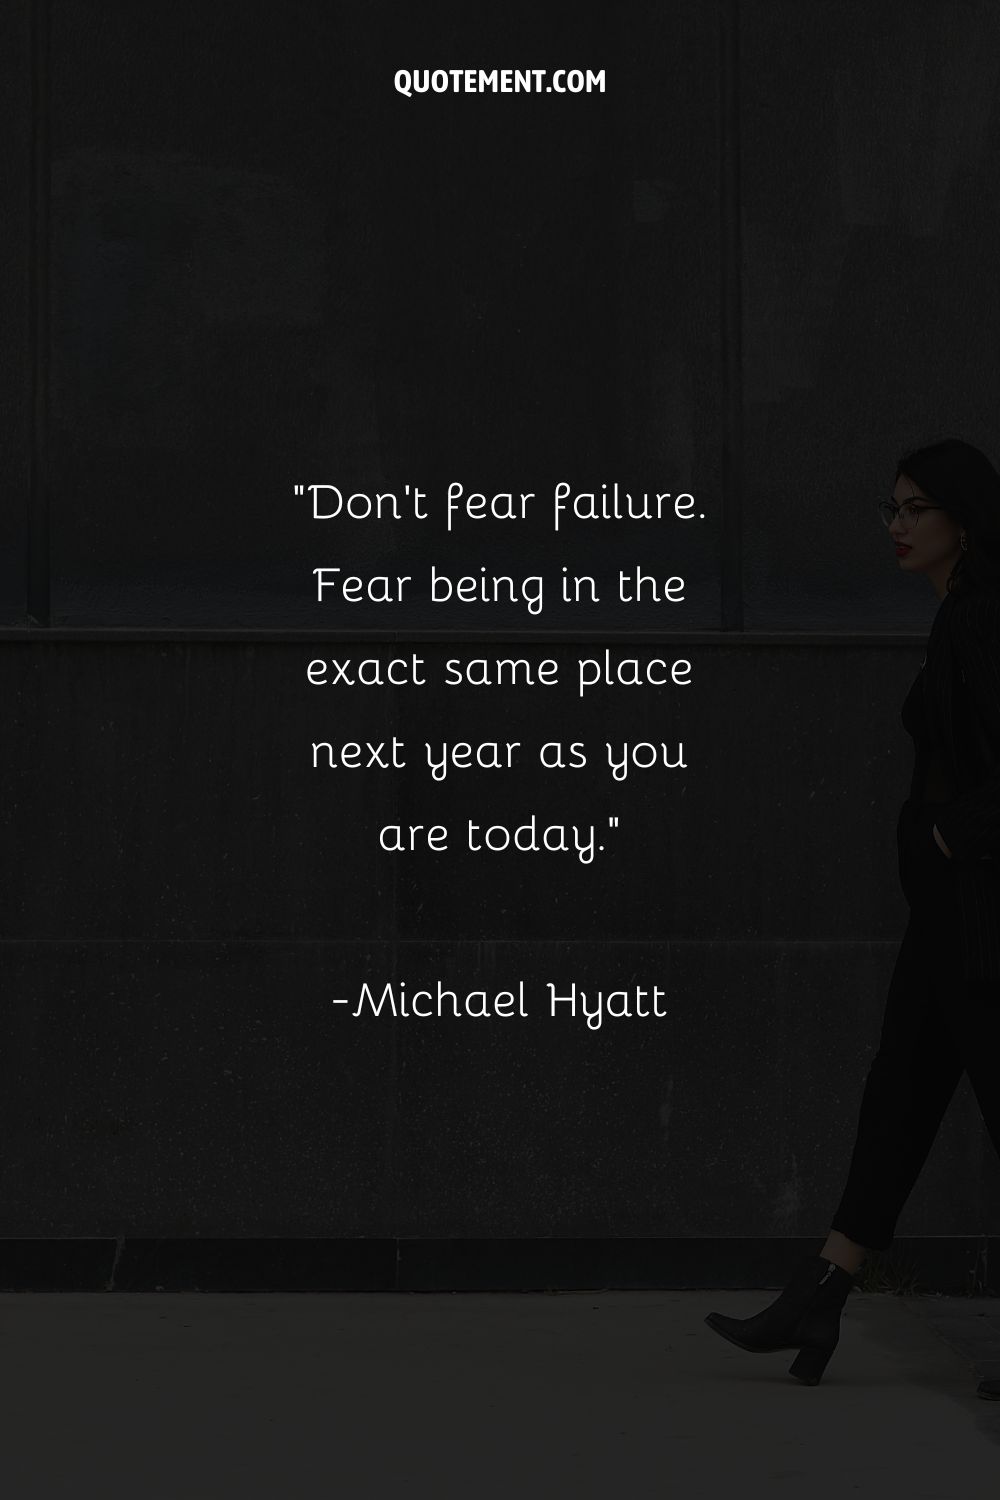 Image of a young woman on the move representing a quote on fearing failure.